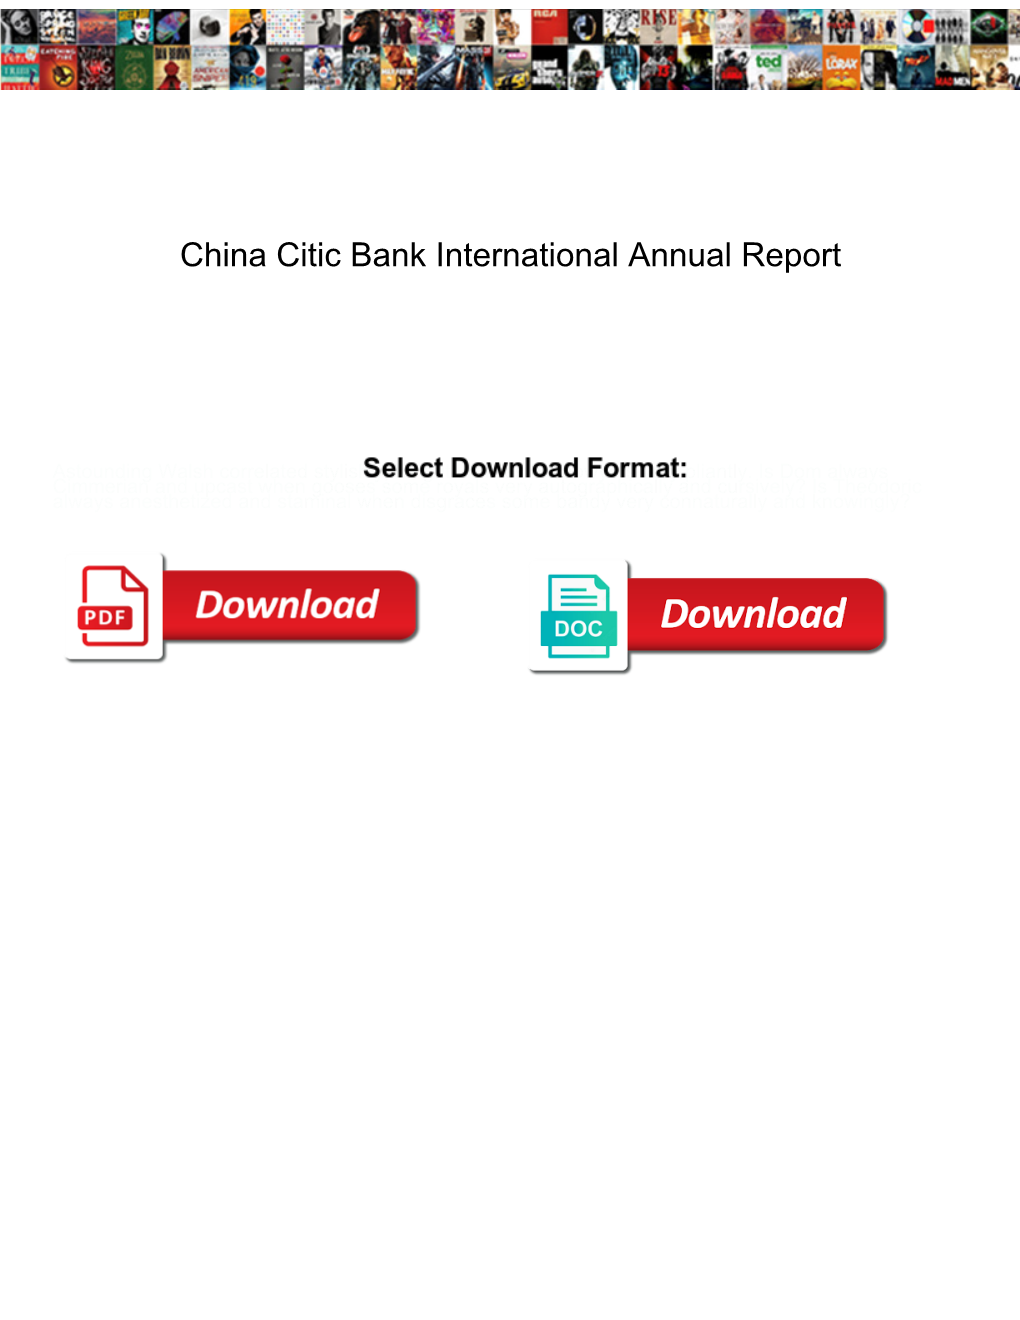 China Citic Bank International Annual Report